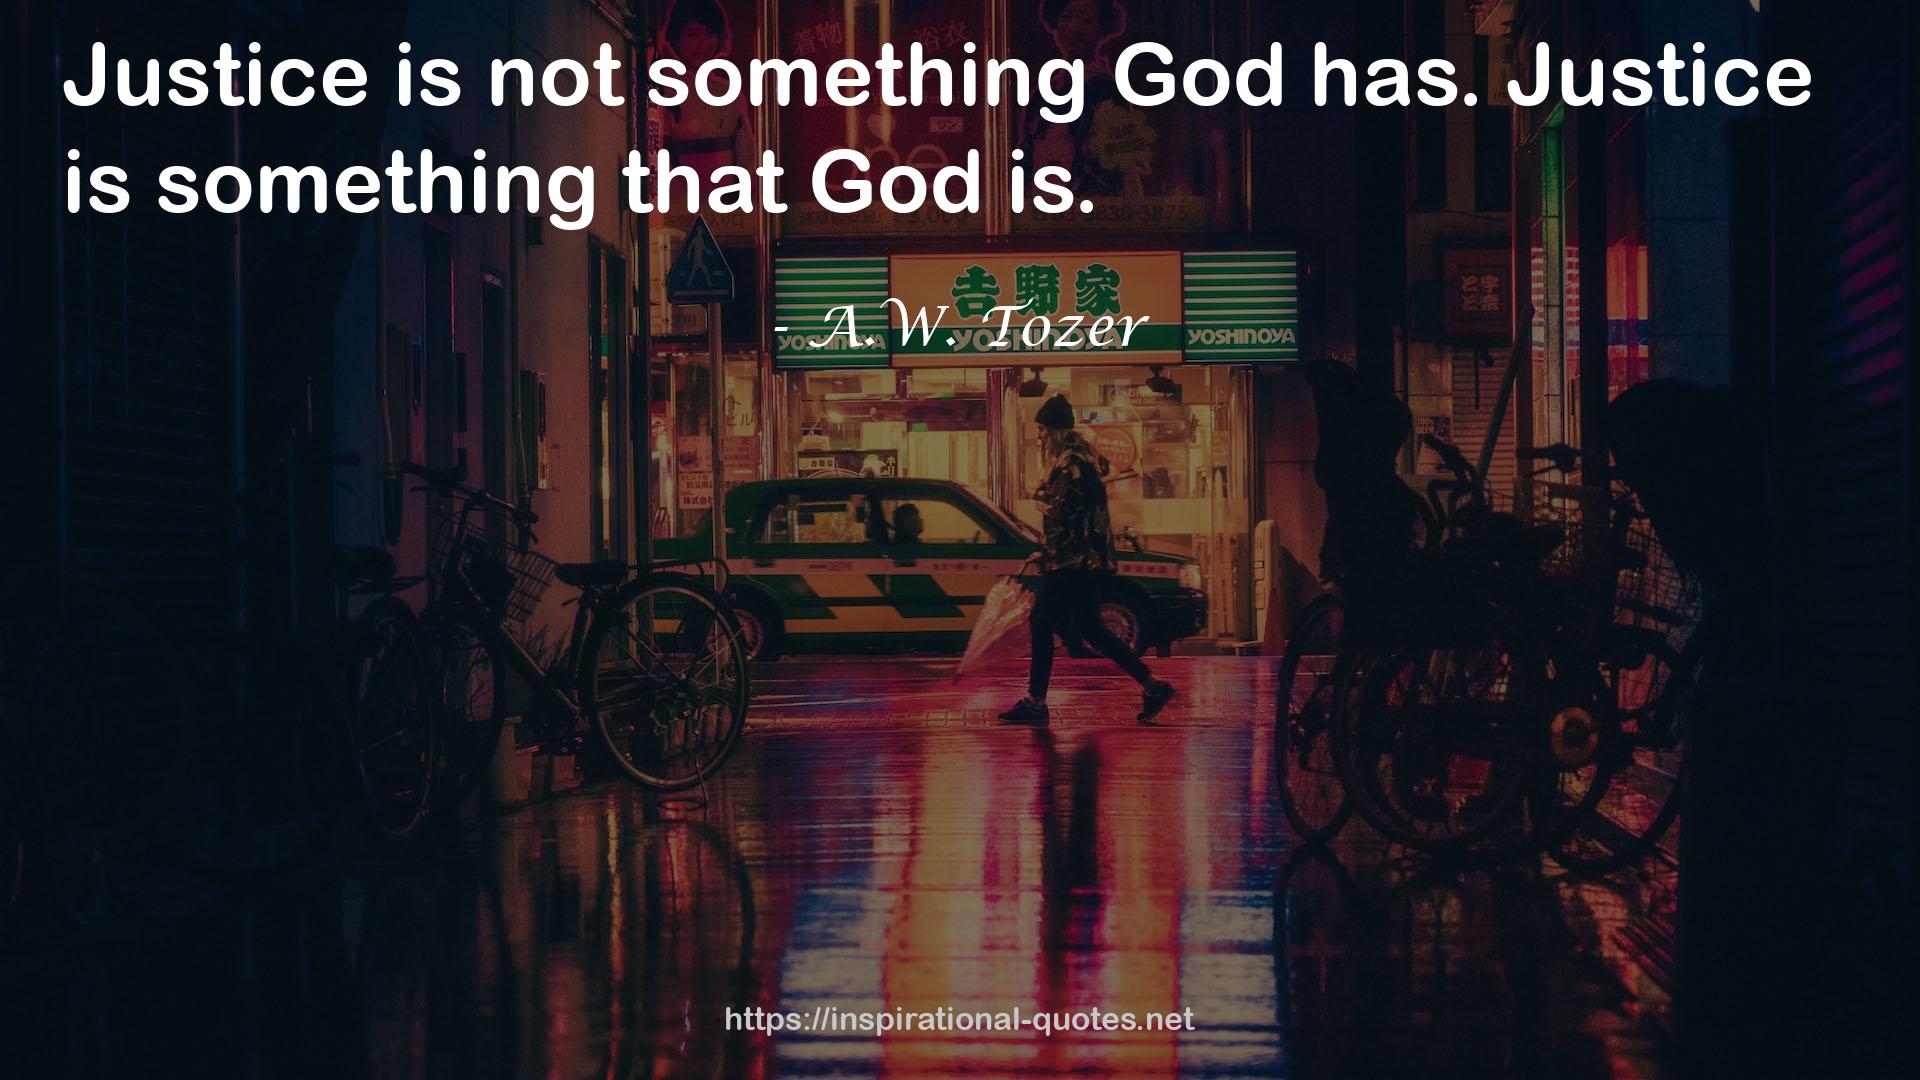 A.W. Tozer QUOTES